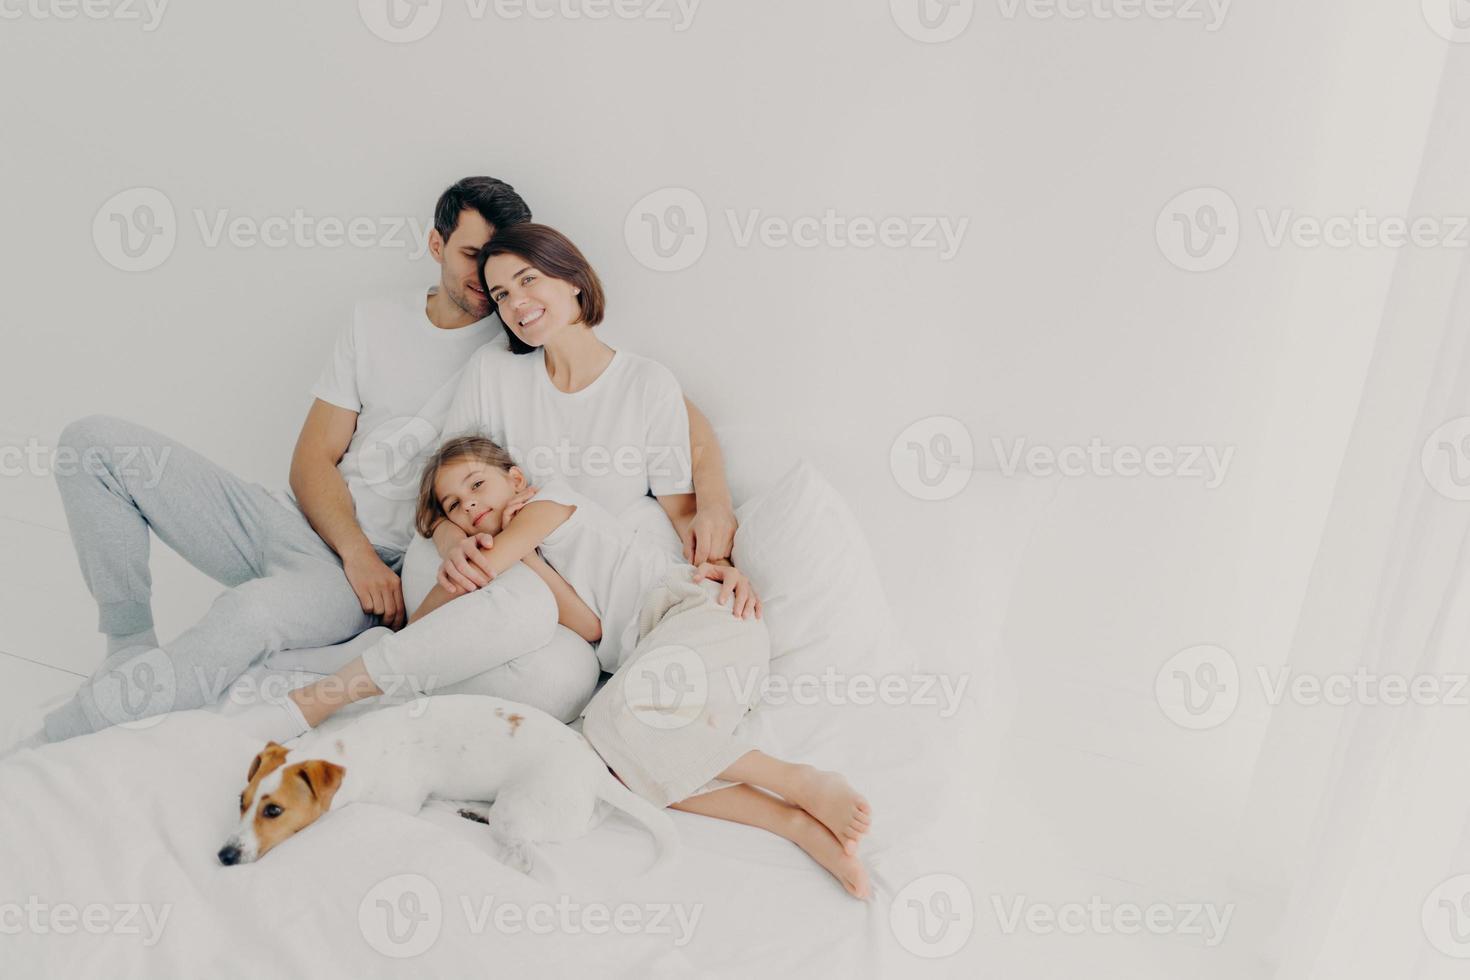 Pleased husband, wife and their small daughter pose in spacious bedroom with favourite pet, have fun, embrace and express love to each other, suppror in difficult situation. Family time concept photo